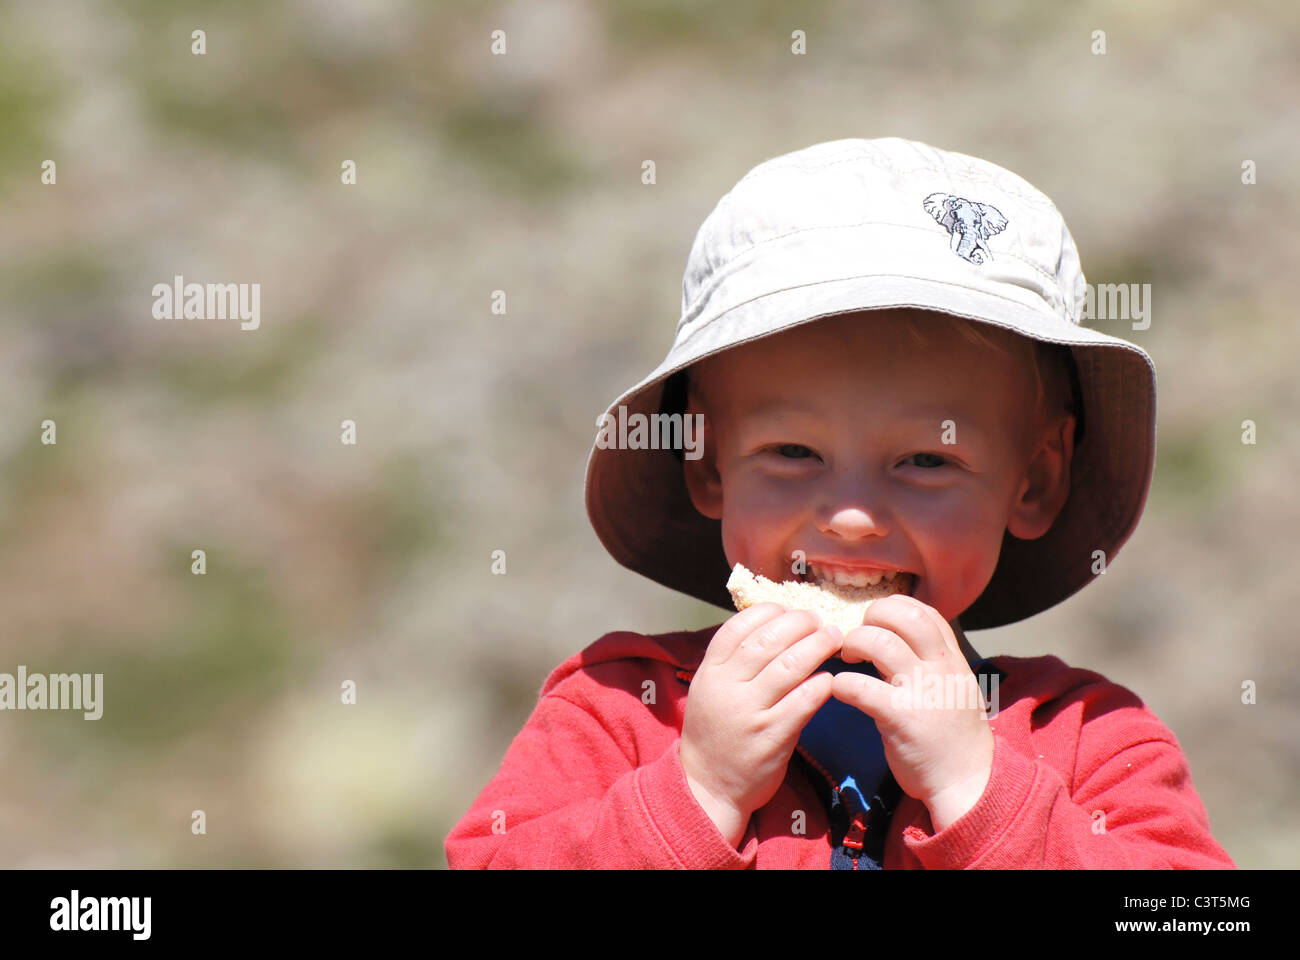 A young boy sat enjoying a drink and a picnic at Kreuzboden in the Saas valley, Switzerland. Stock Photo